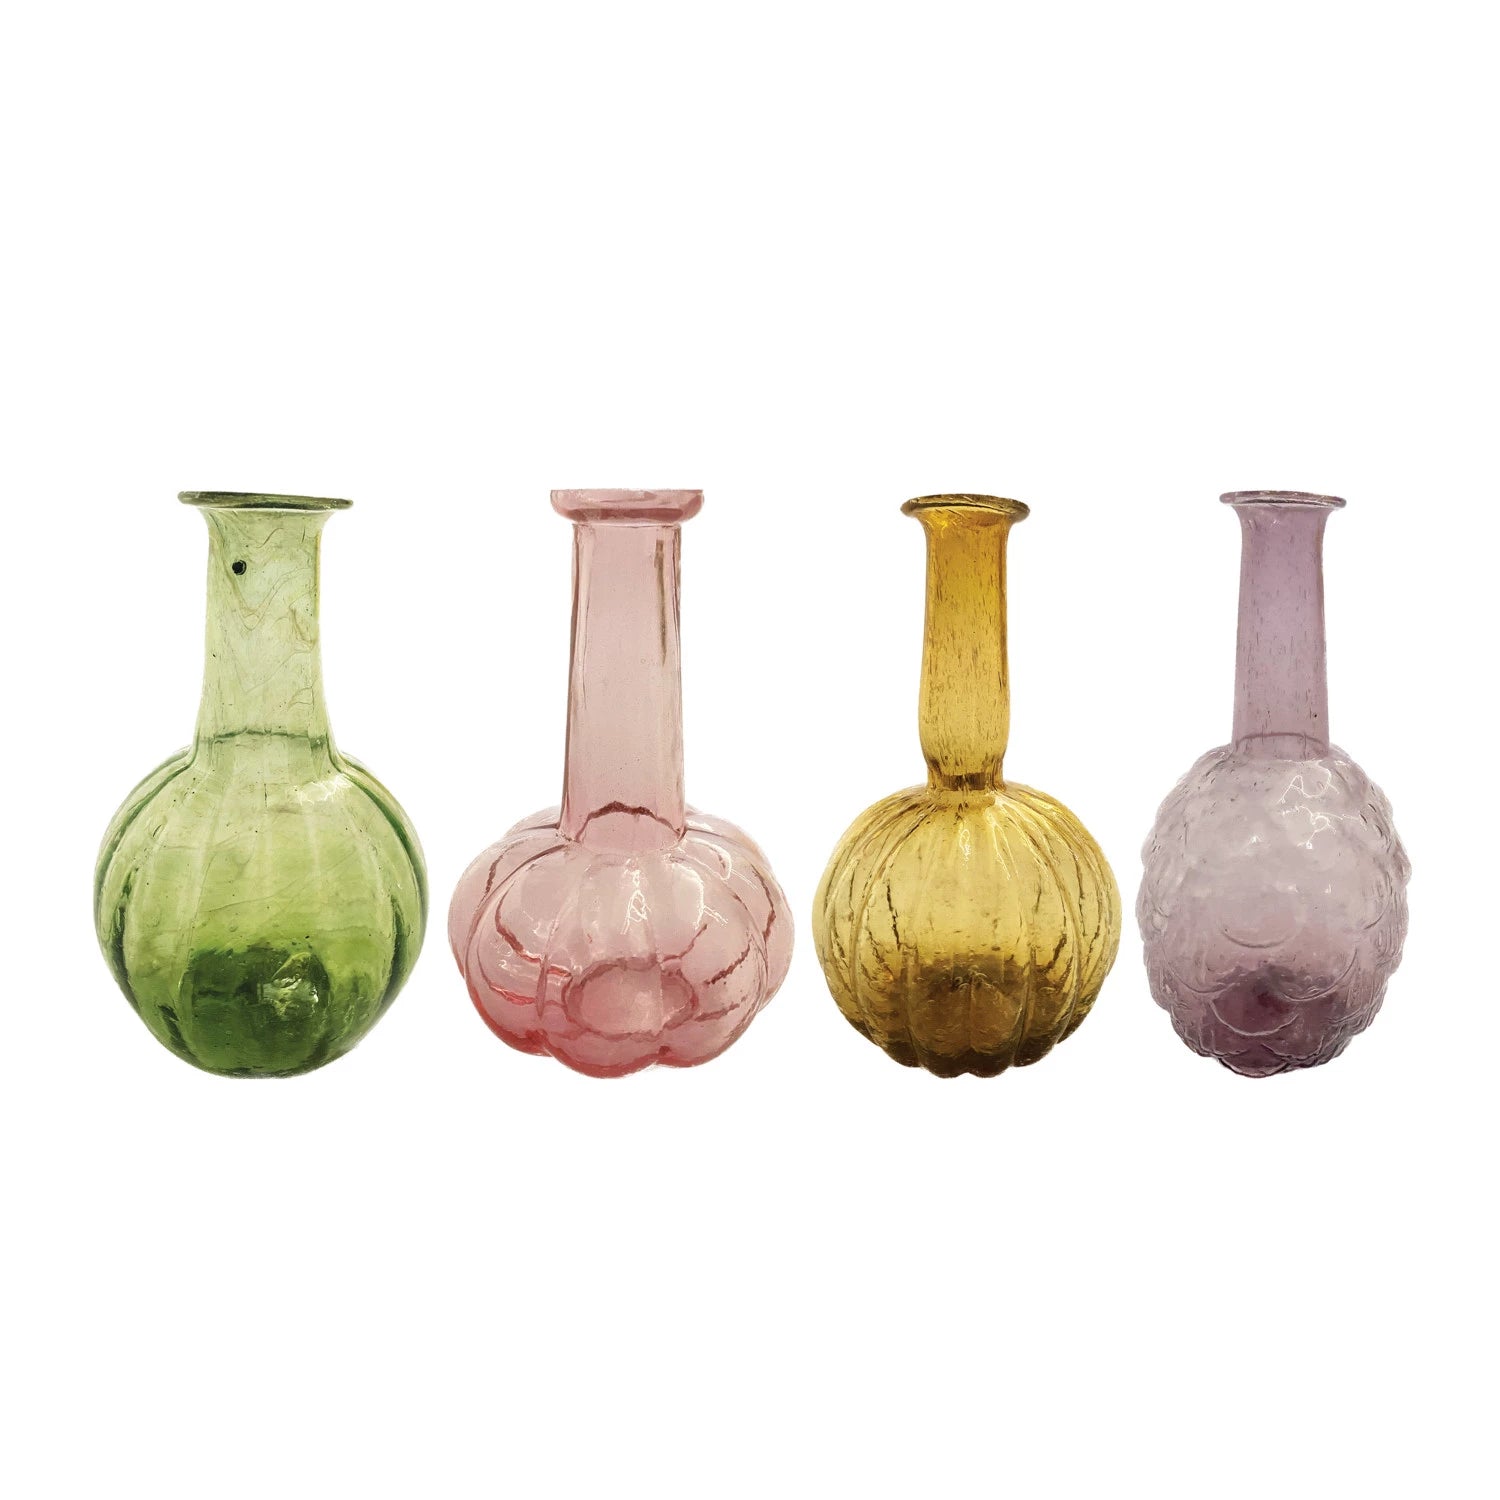 3 colors and designs of recycled glass vases on a white background.